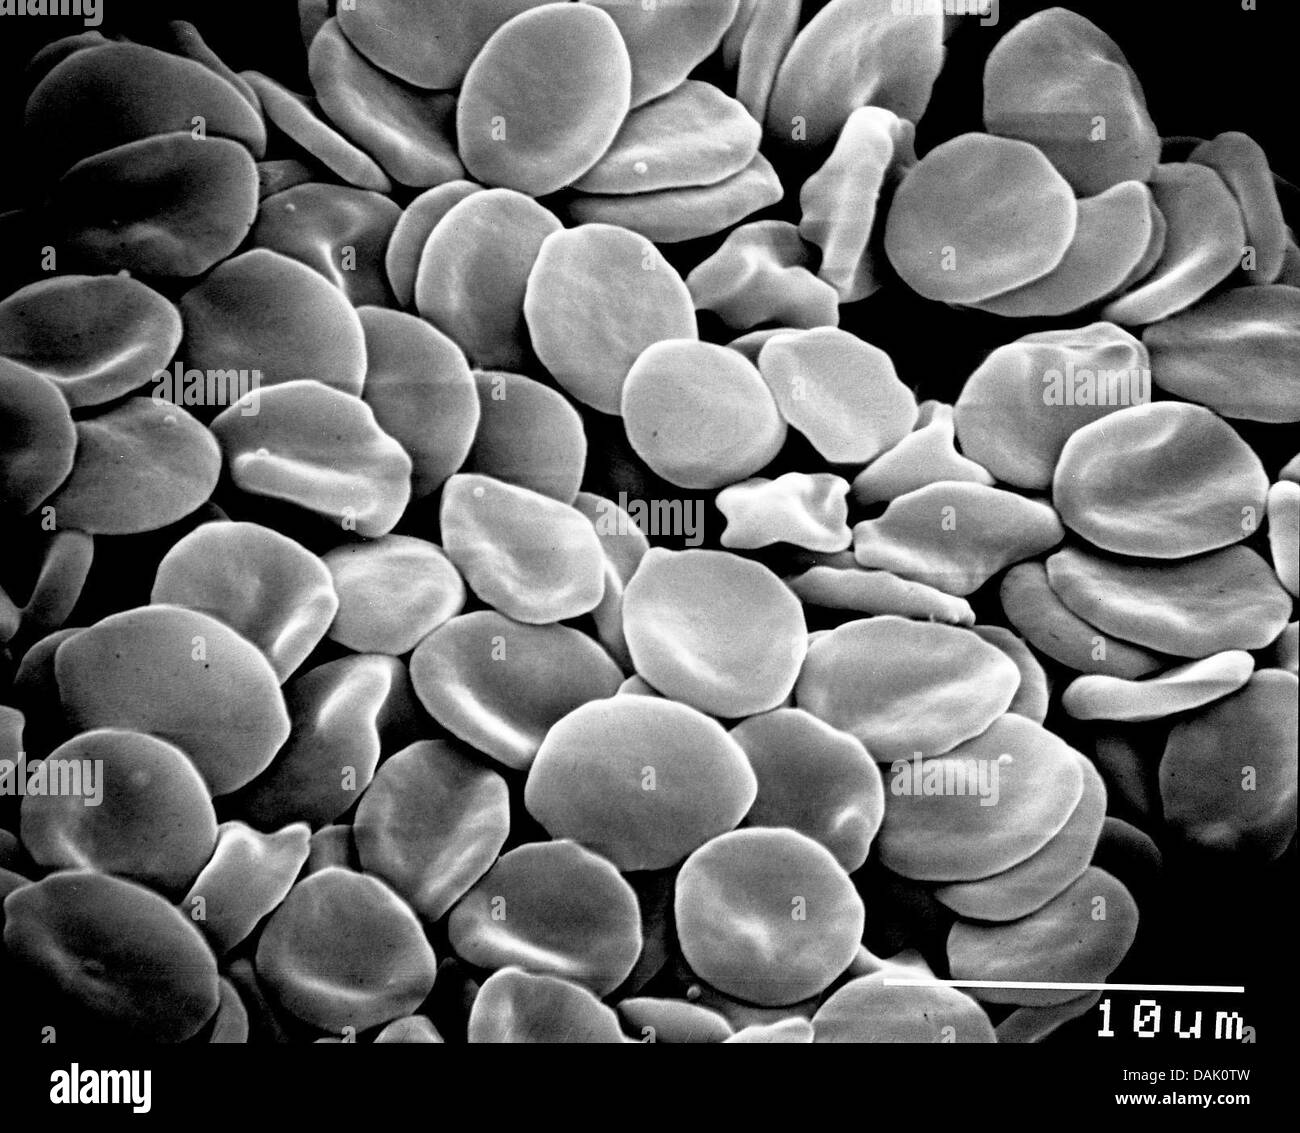 HANDOUT - An undated scanning electron microscope handout picture from the Max Planck Institute for Molecular Biomedicine shows human blood in Muenster, Germany. Numerous scientists at the institute of the University of Muenster are involved in stem cell research. Photo: Mpi Muenster Stock Photo